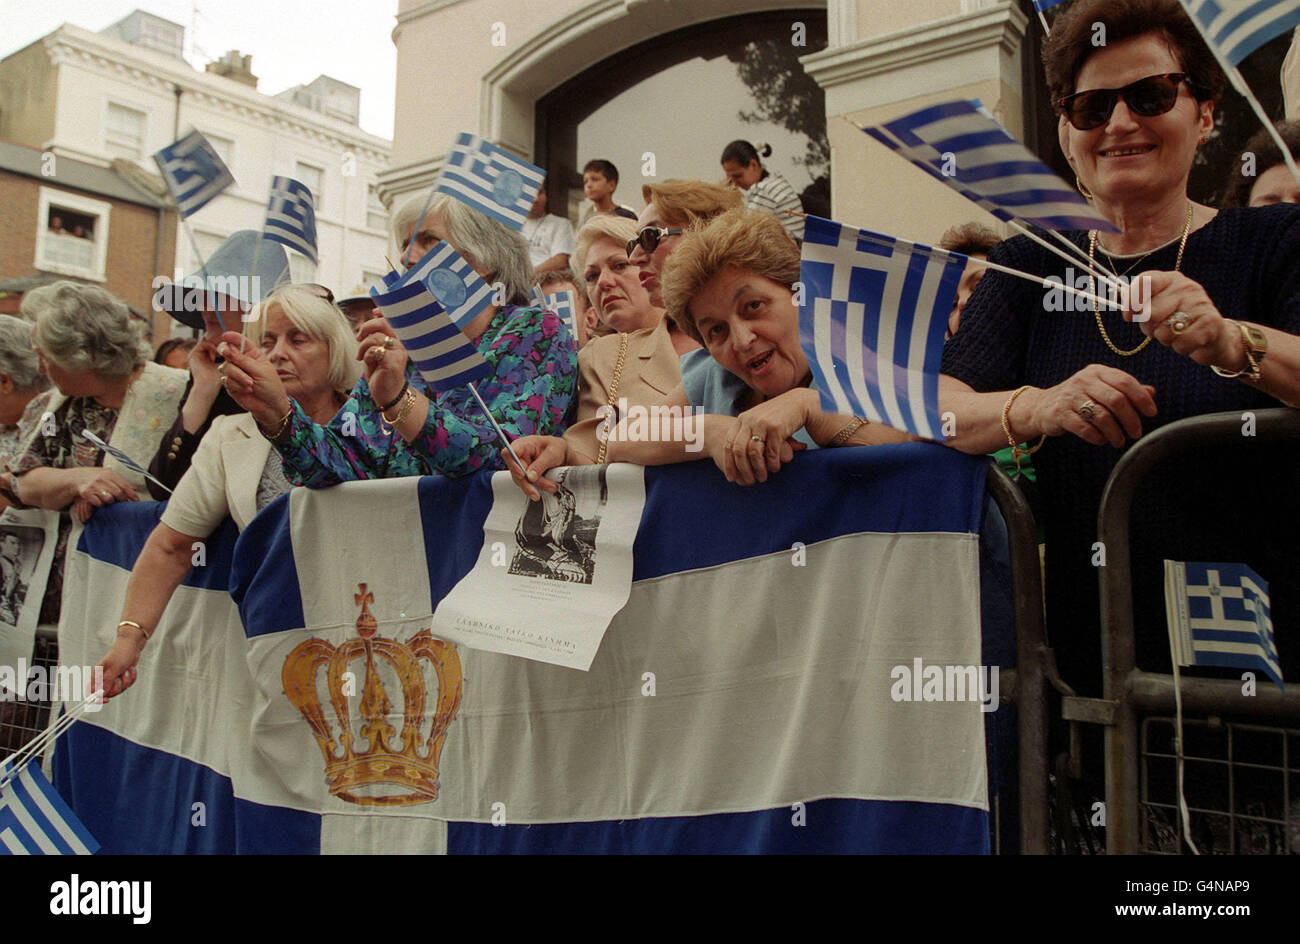 Supporters of the Greek royal family wave flags as they gather outside the Greek Orthodox Cathedral of St Sophia in Bayswater, west London, where the wedding service of Princess Alexia of Greece and Carlos Morales Quintana of Spain was being held. Stock Photo